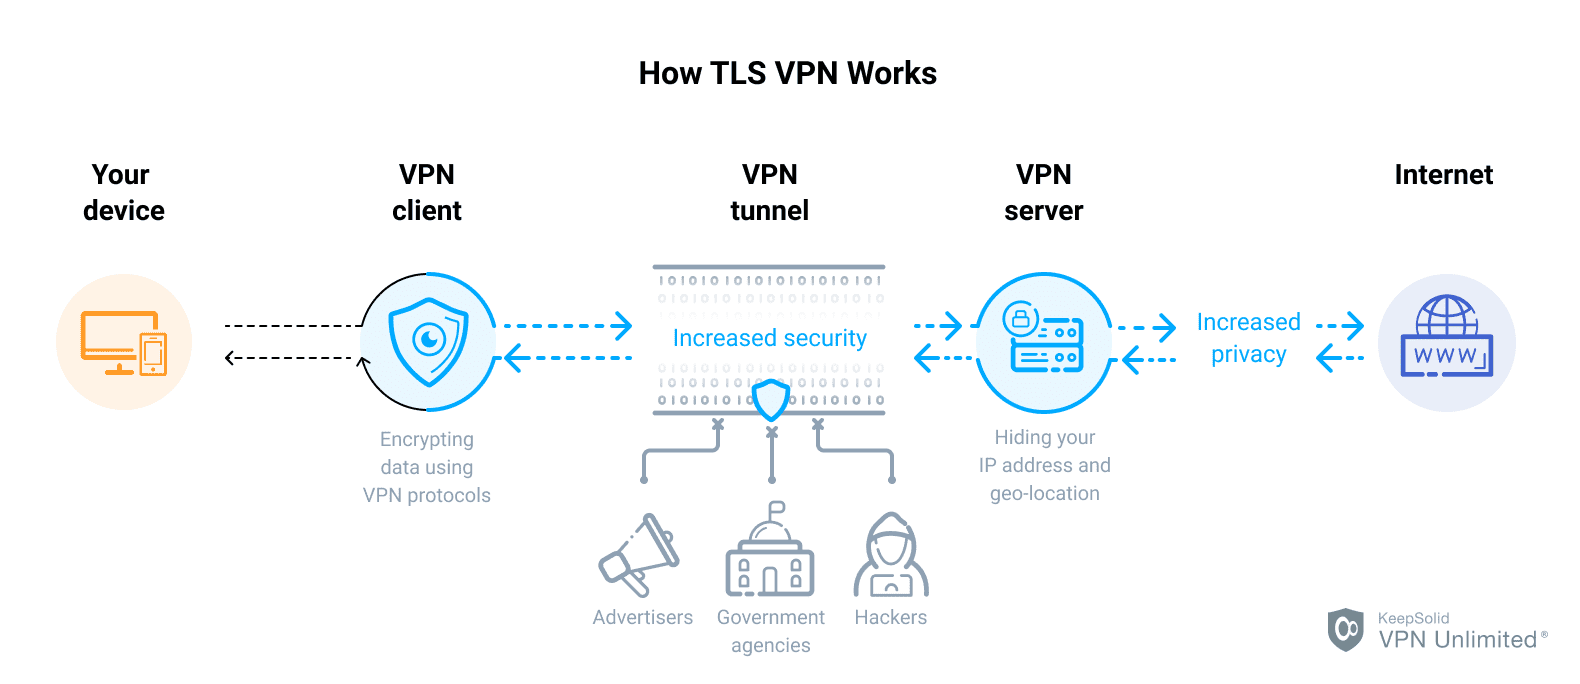 Can TLS be used for VPN?